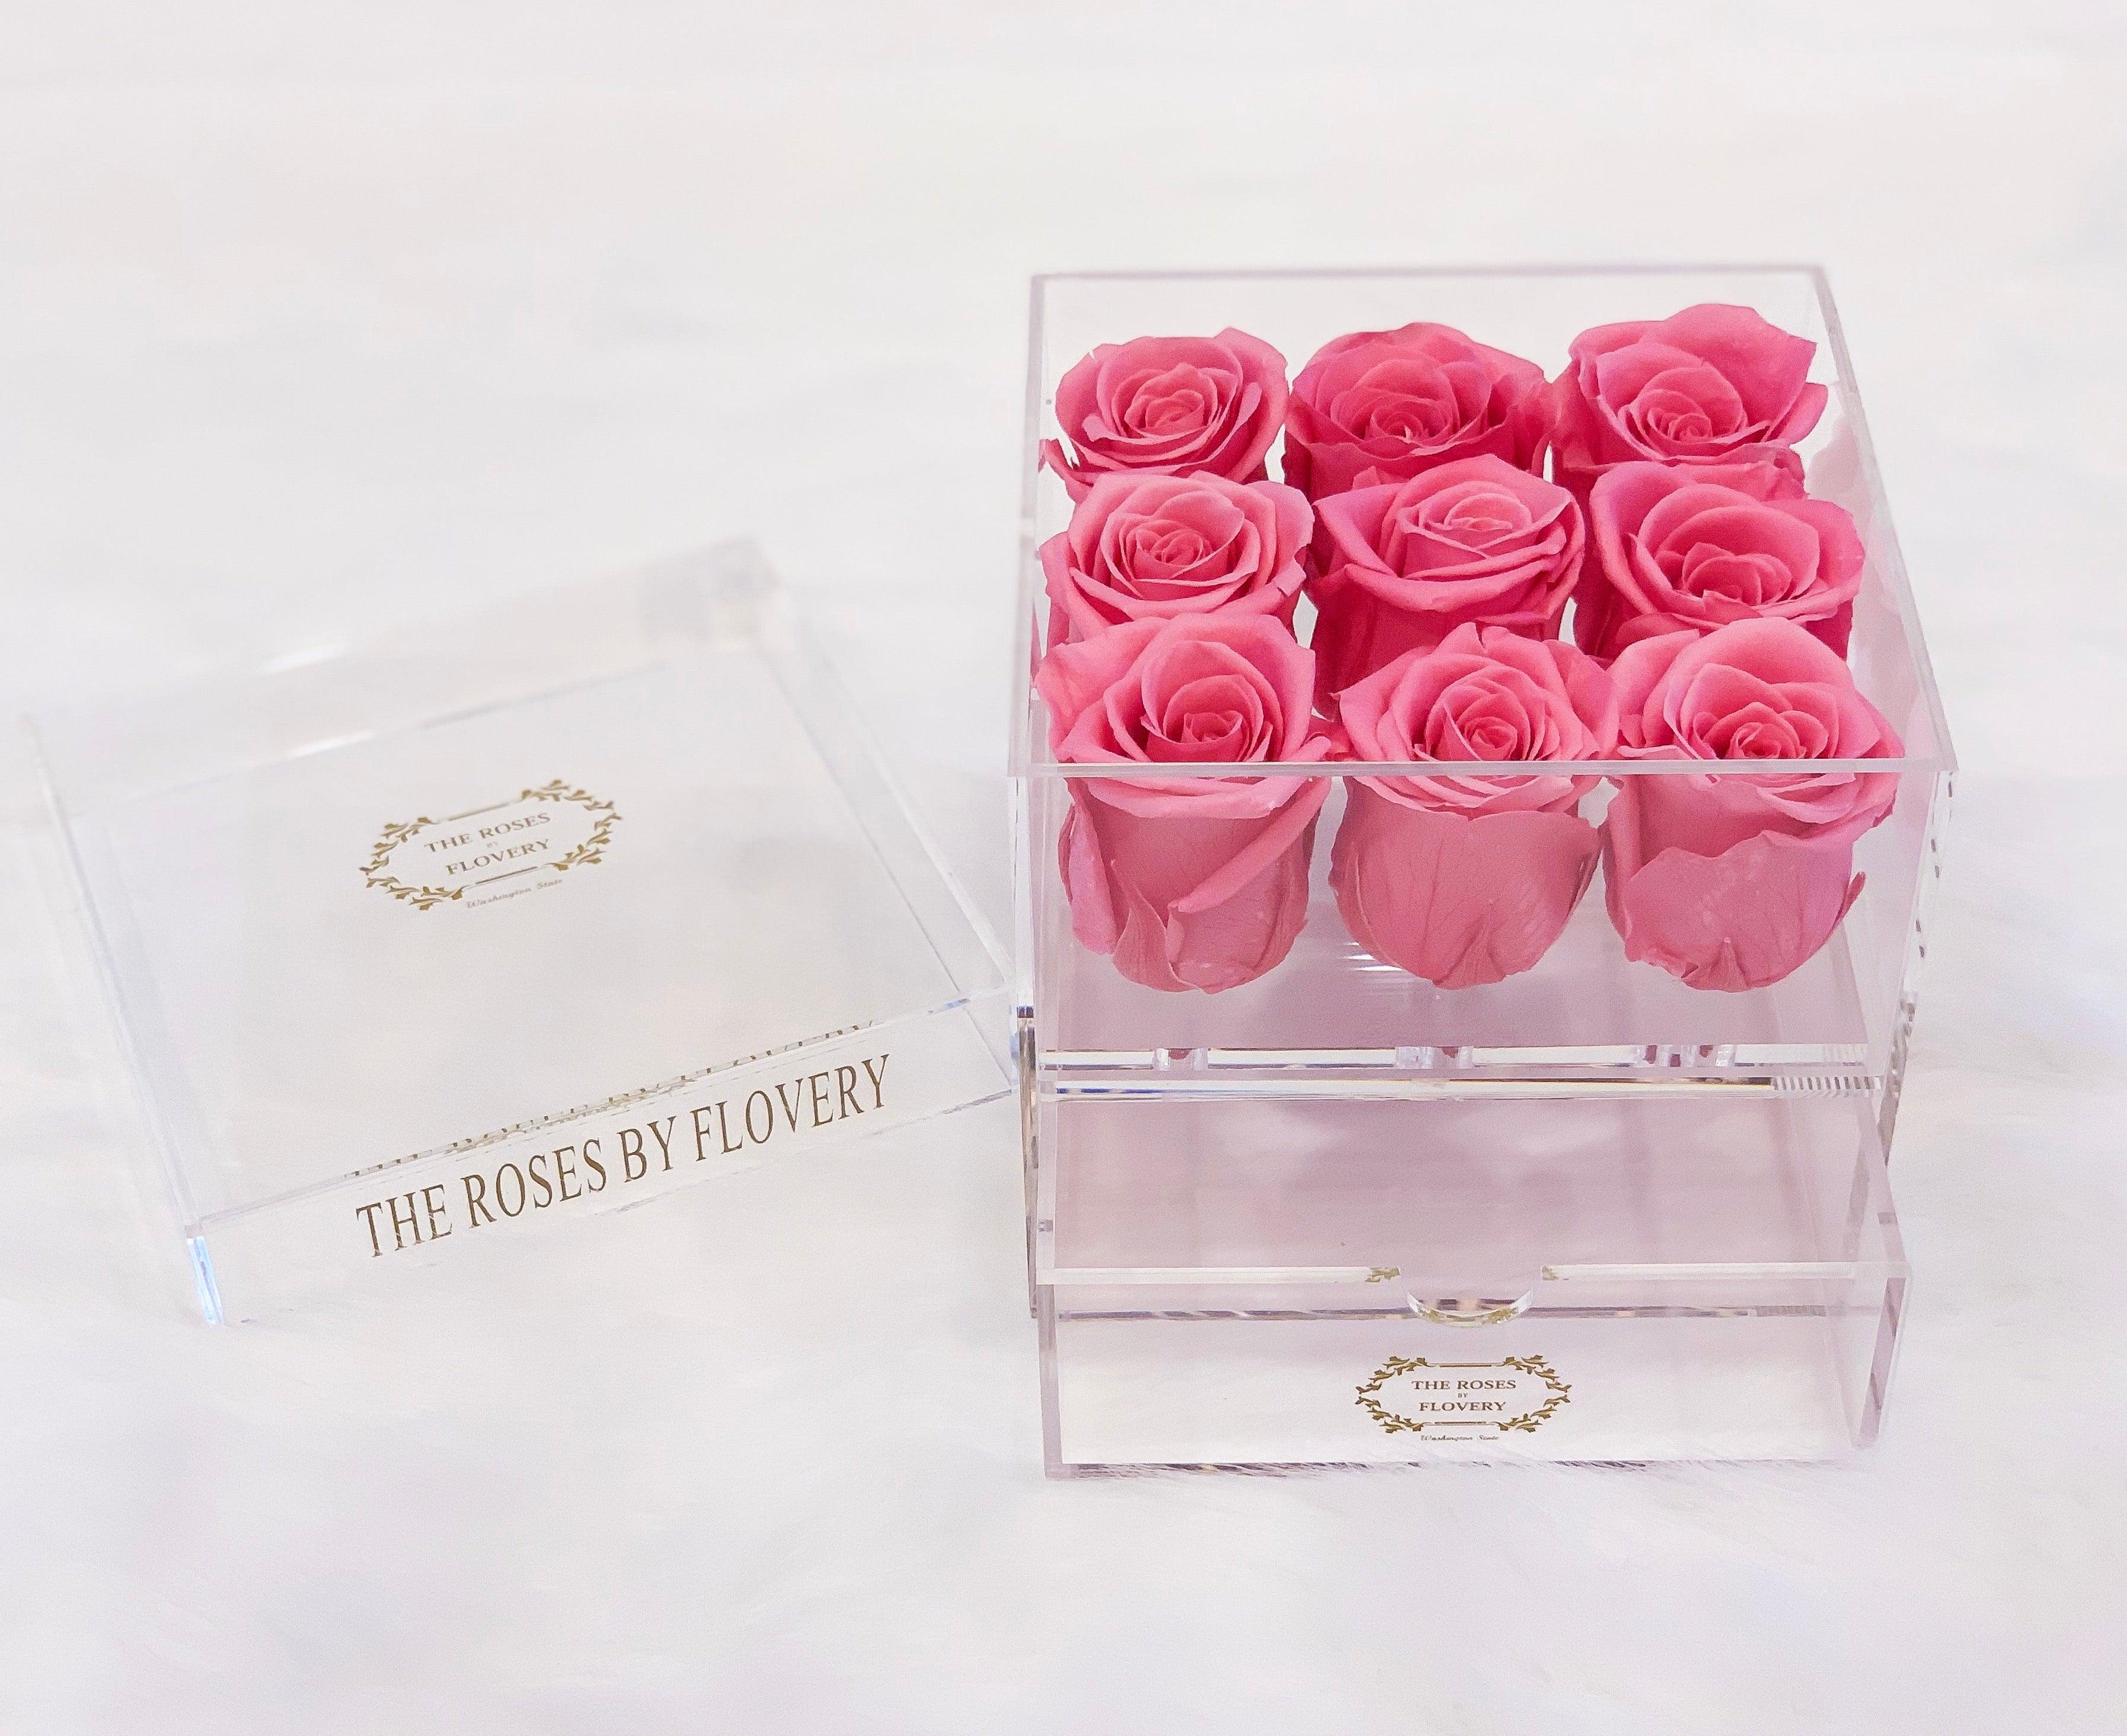 9 PREMIUM ECUADOR PRESERVED SWEET PINK ROSES ARRANGEMENT IN JEWELRY ACRYLIC BOX WITH DRAWER - Flovery